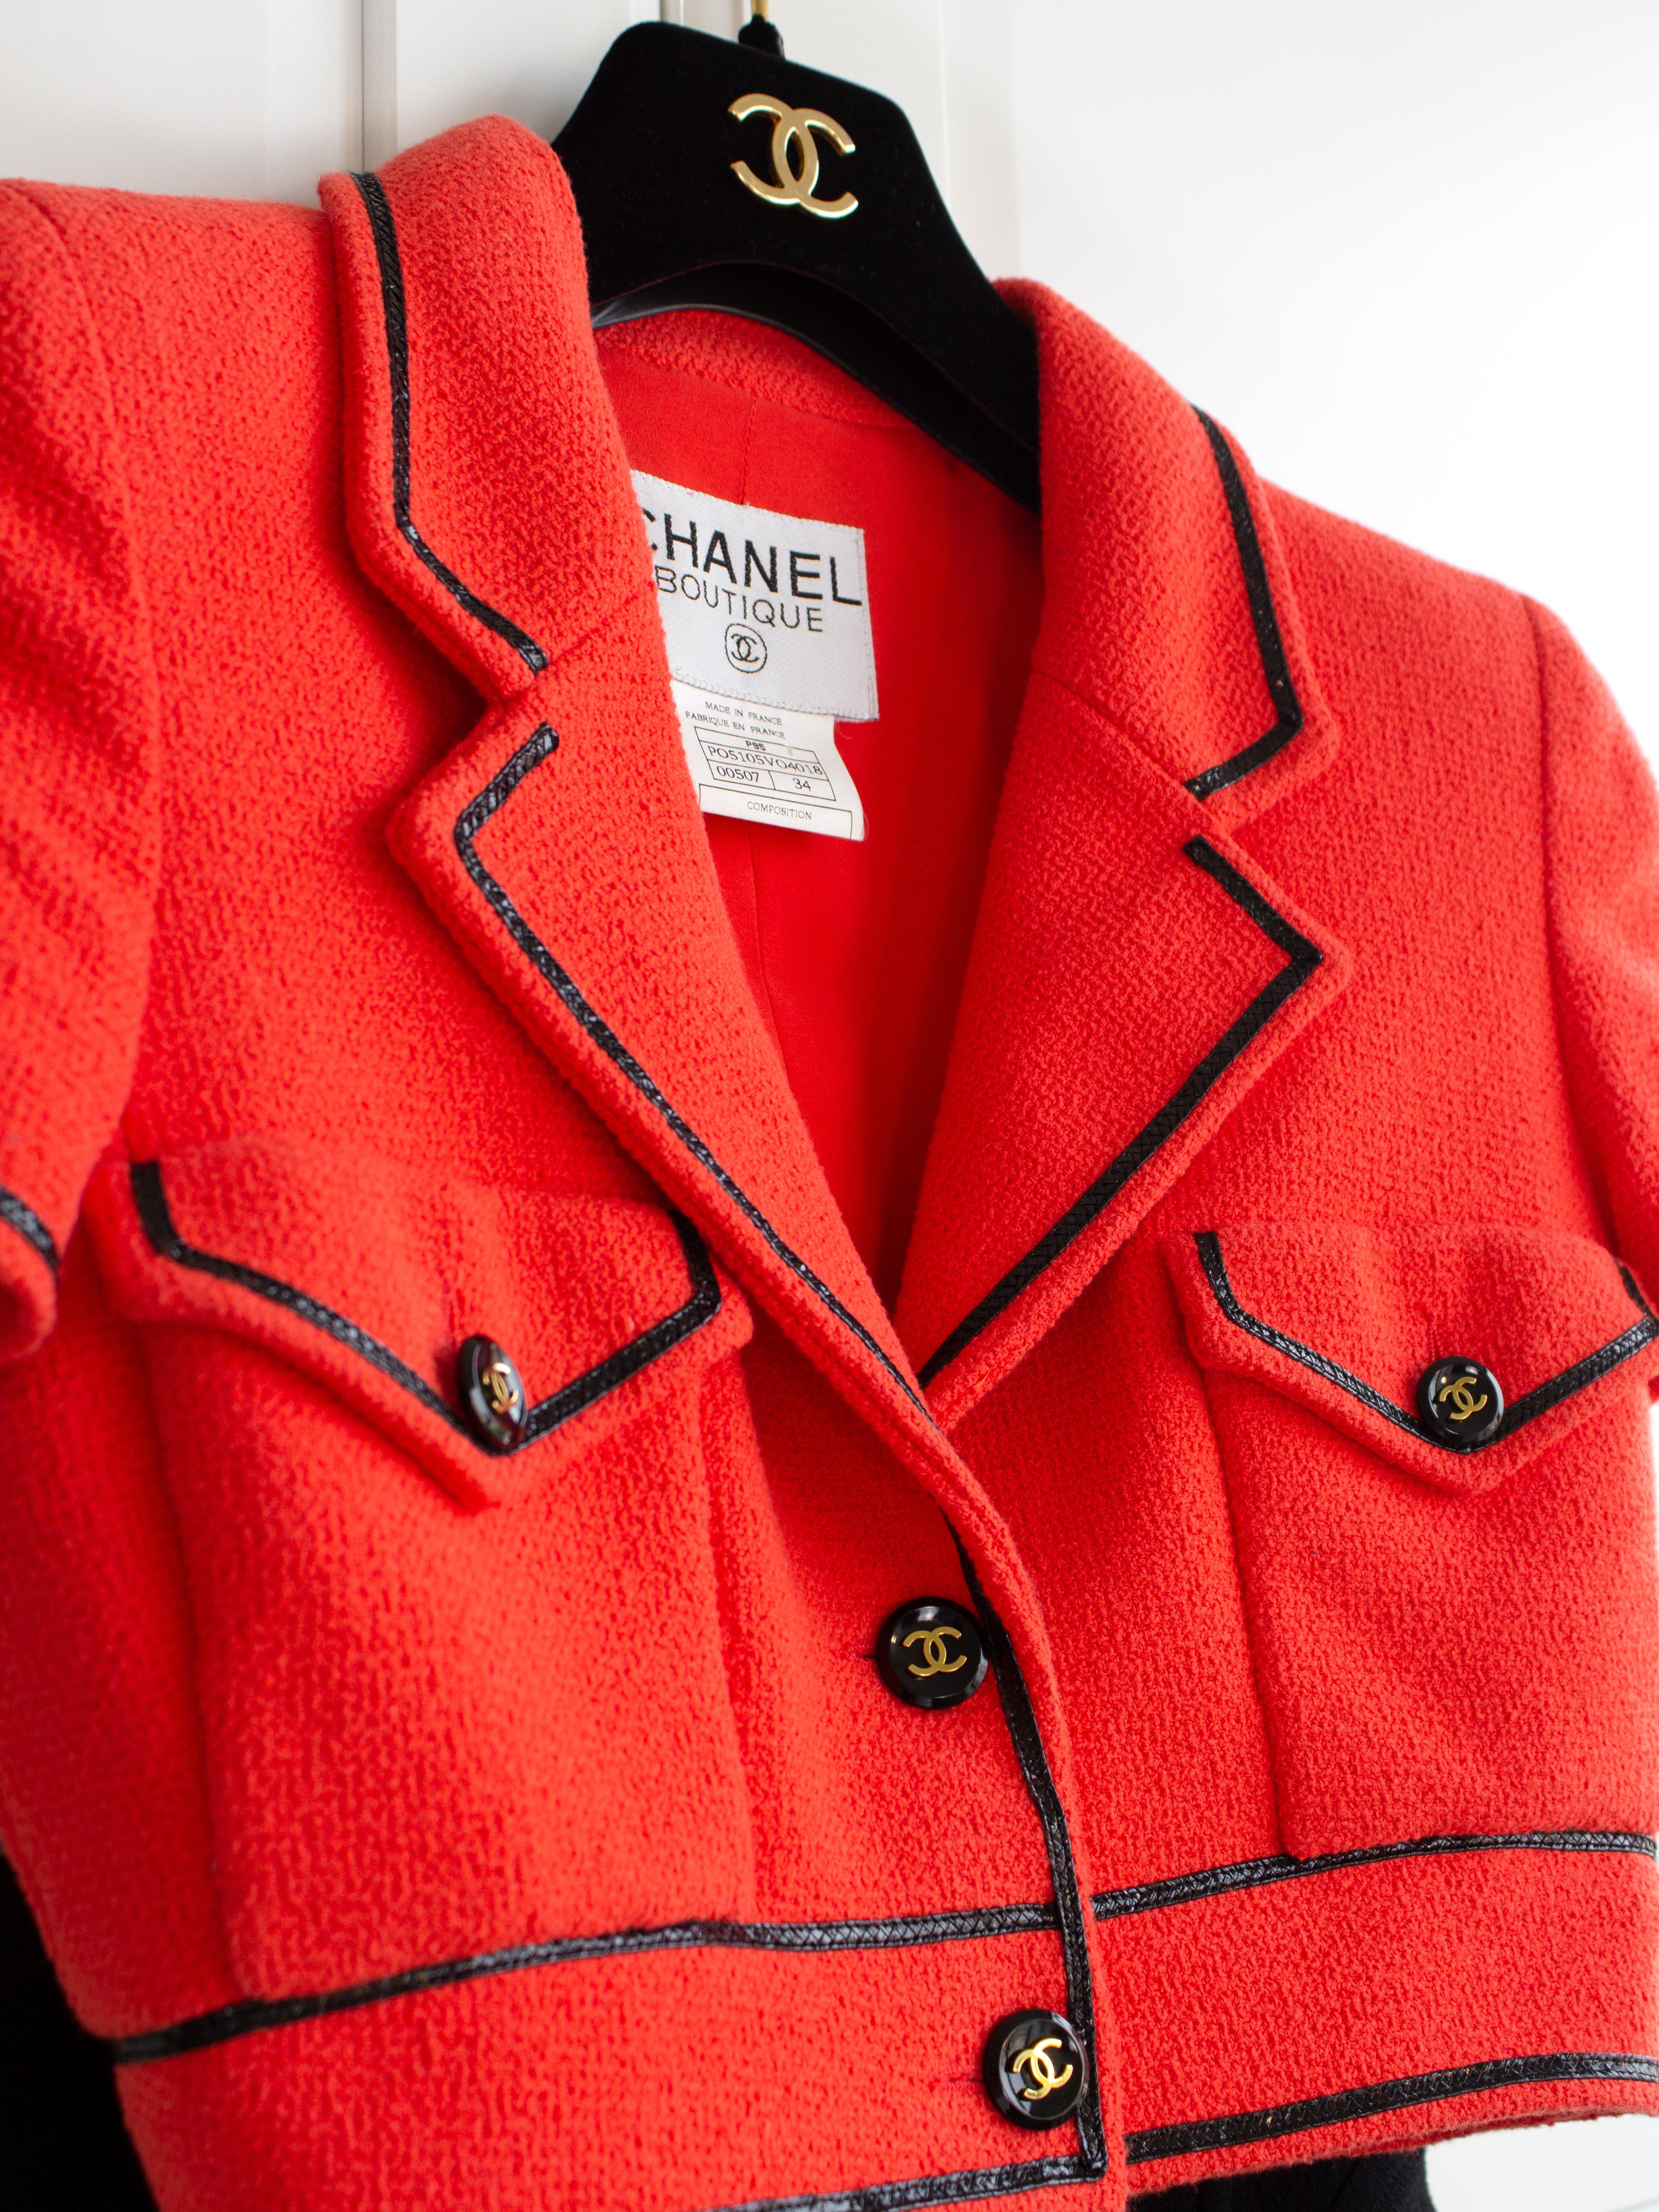 Iconic Chanel Vintage S/S 1995 Barbie Cropped Red Black 95P Jacket Corset Skirt  3